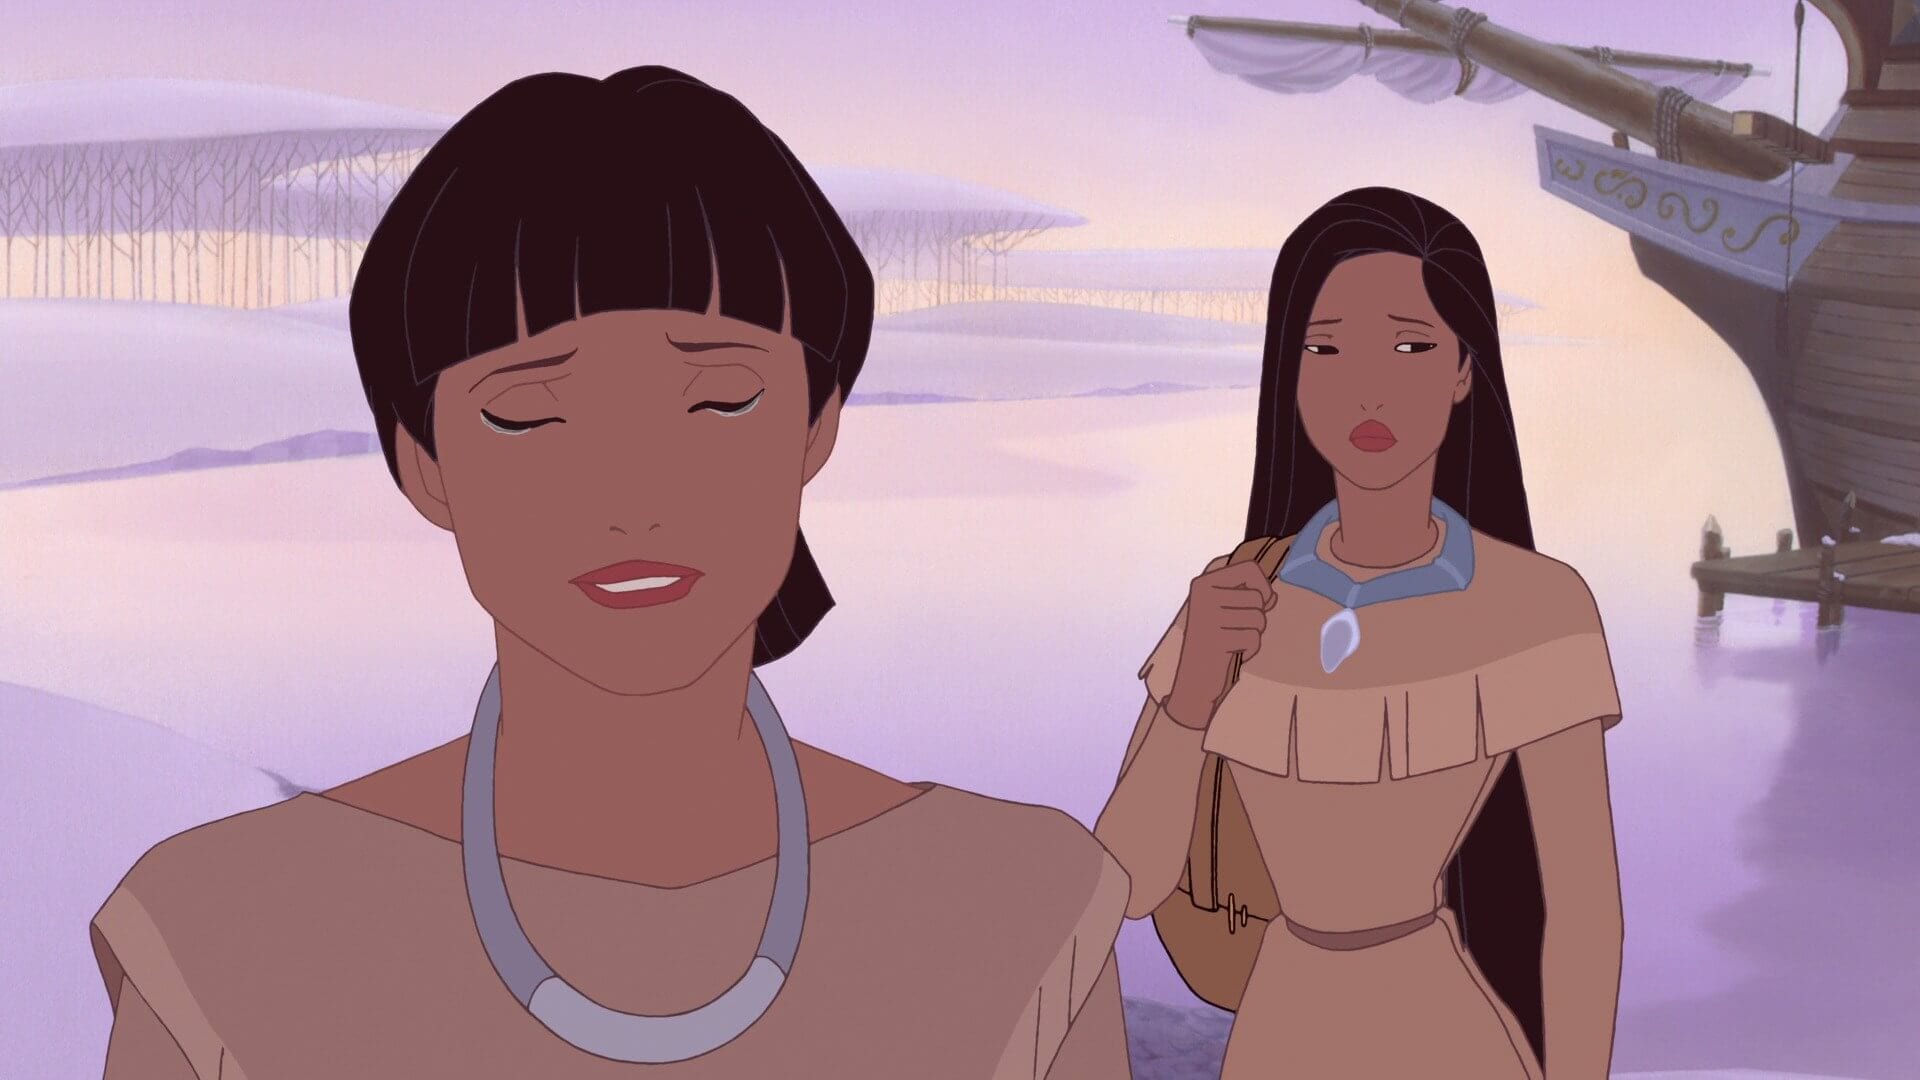 pocahontas 2 journey to a new world part 1